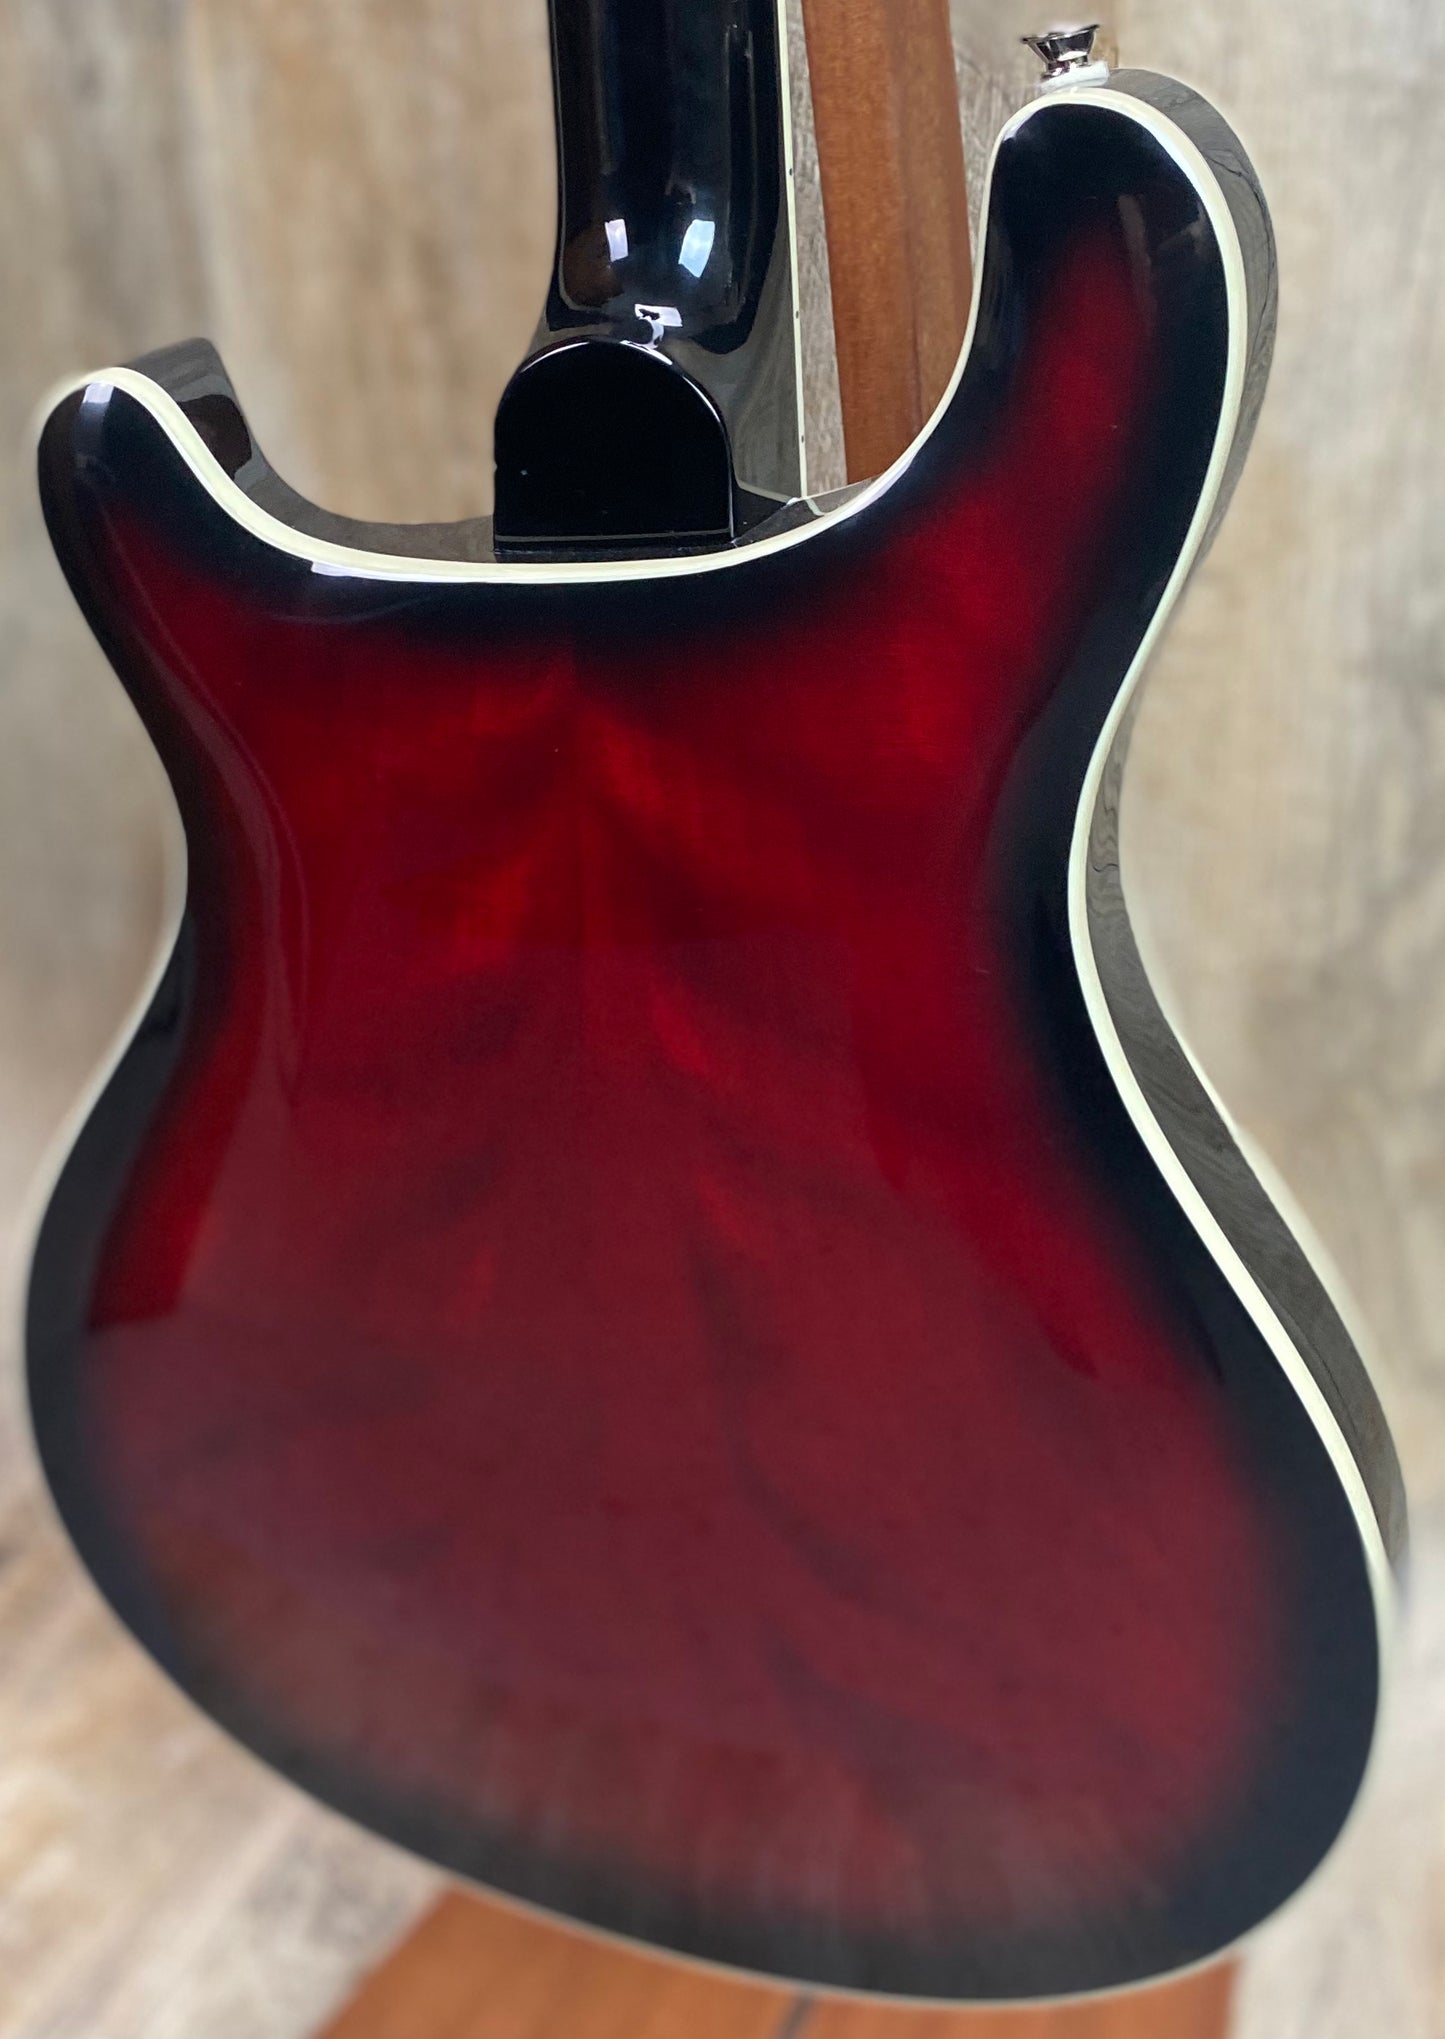 Back left angle of Open Box PRS Paul Reed Smith SE Hollowbody Standard Fire Red Burst.